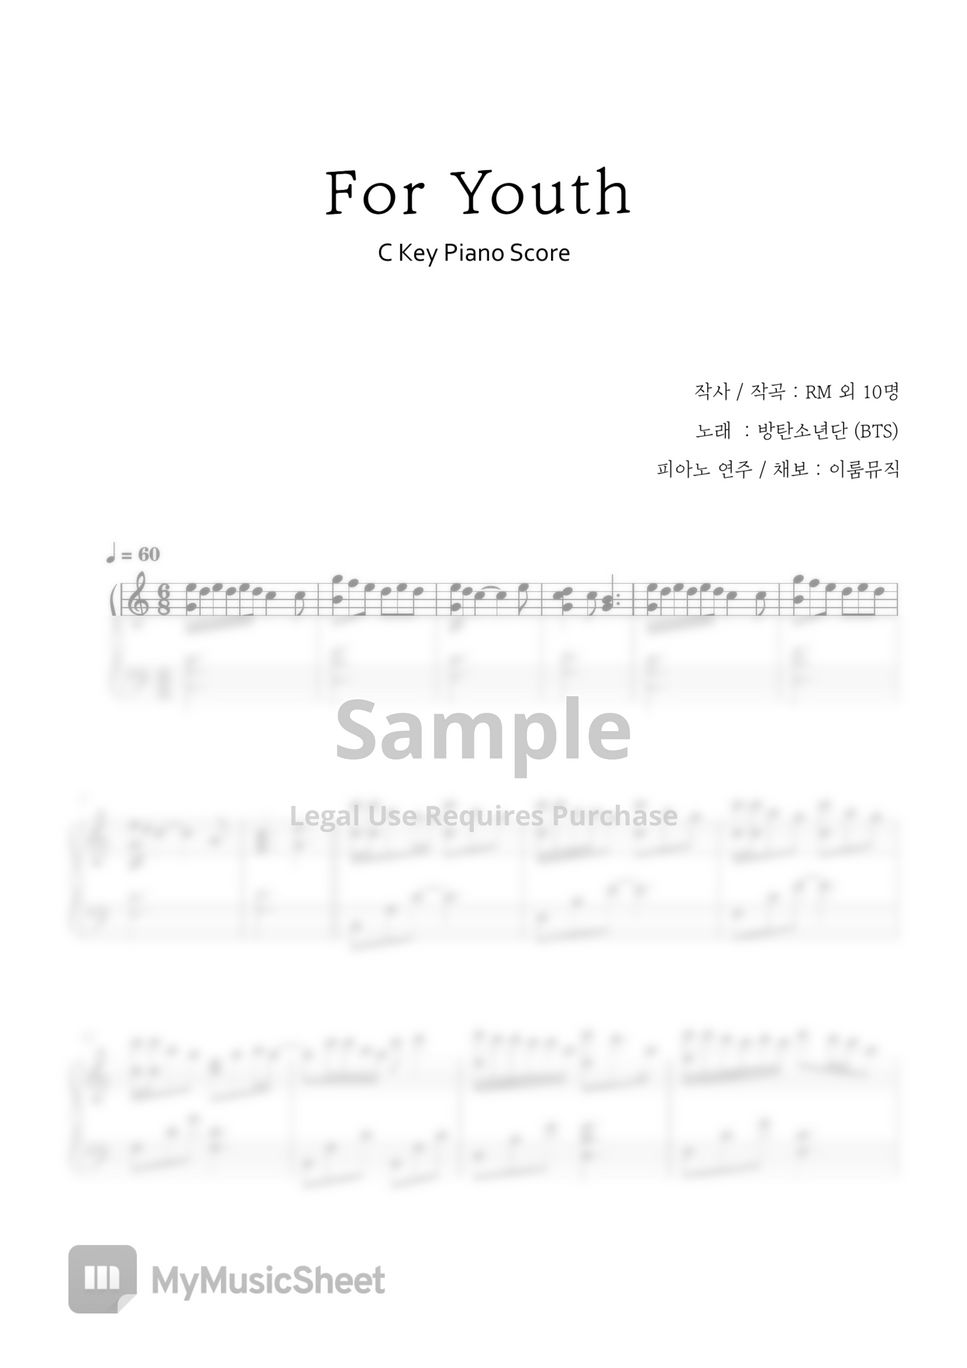 BTS - For Youth (Easy Key) by IRUM MUSIC